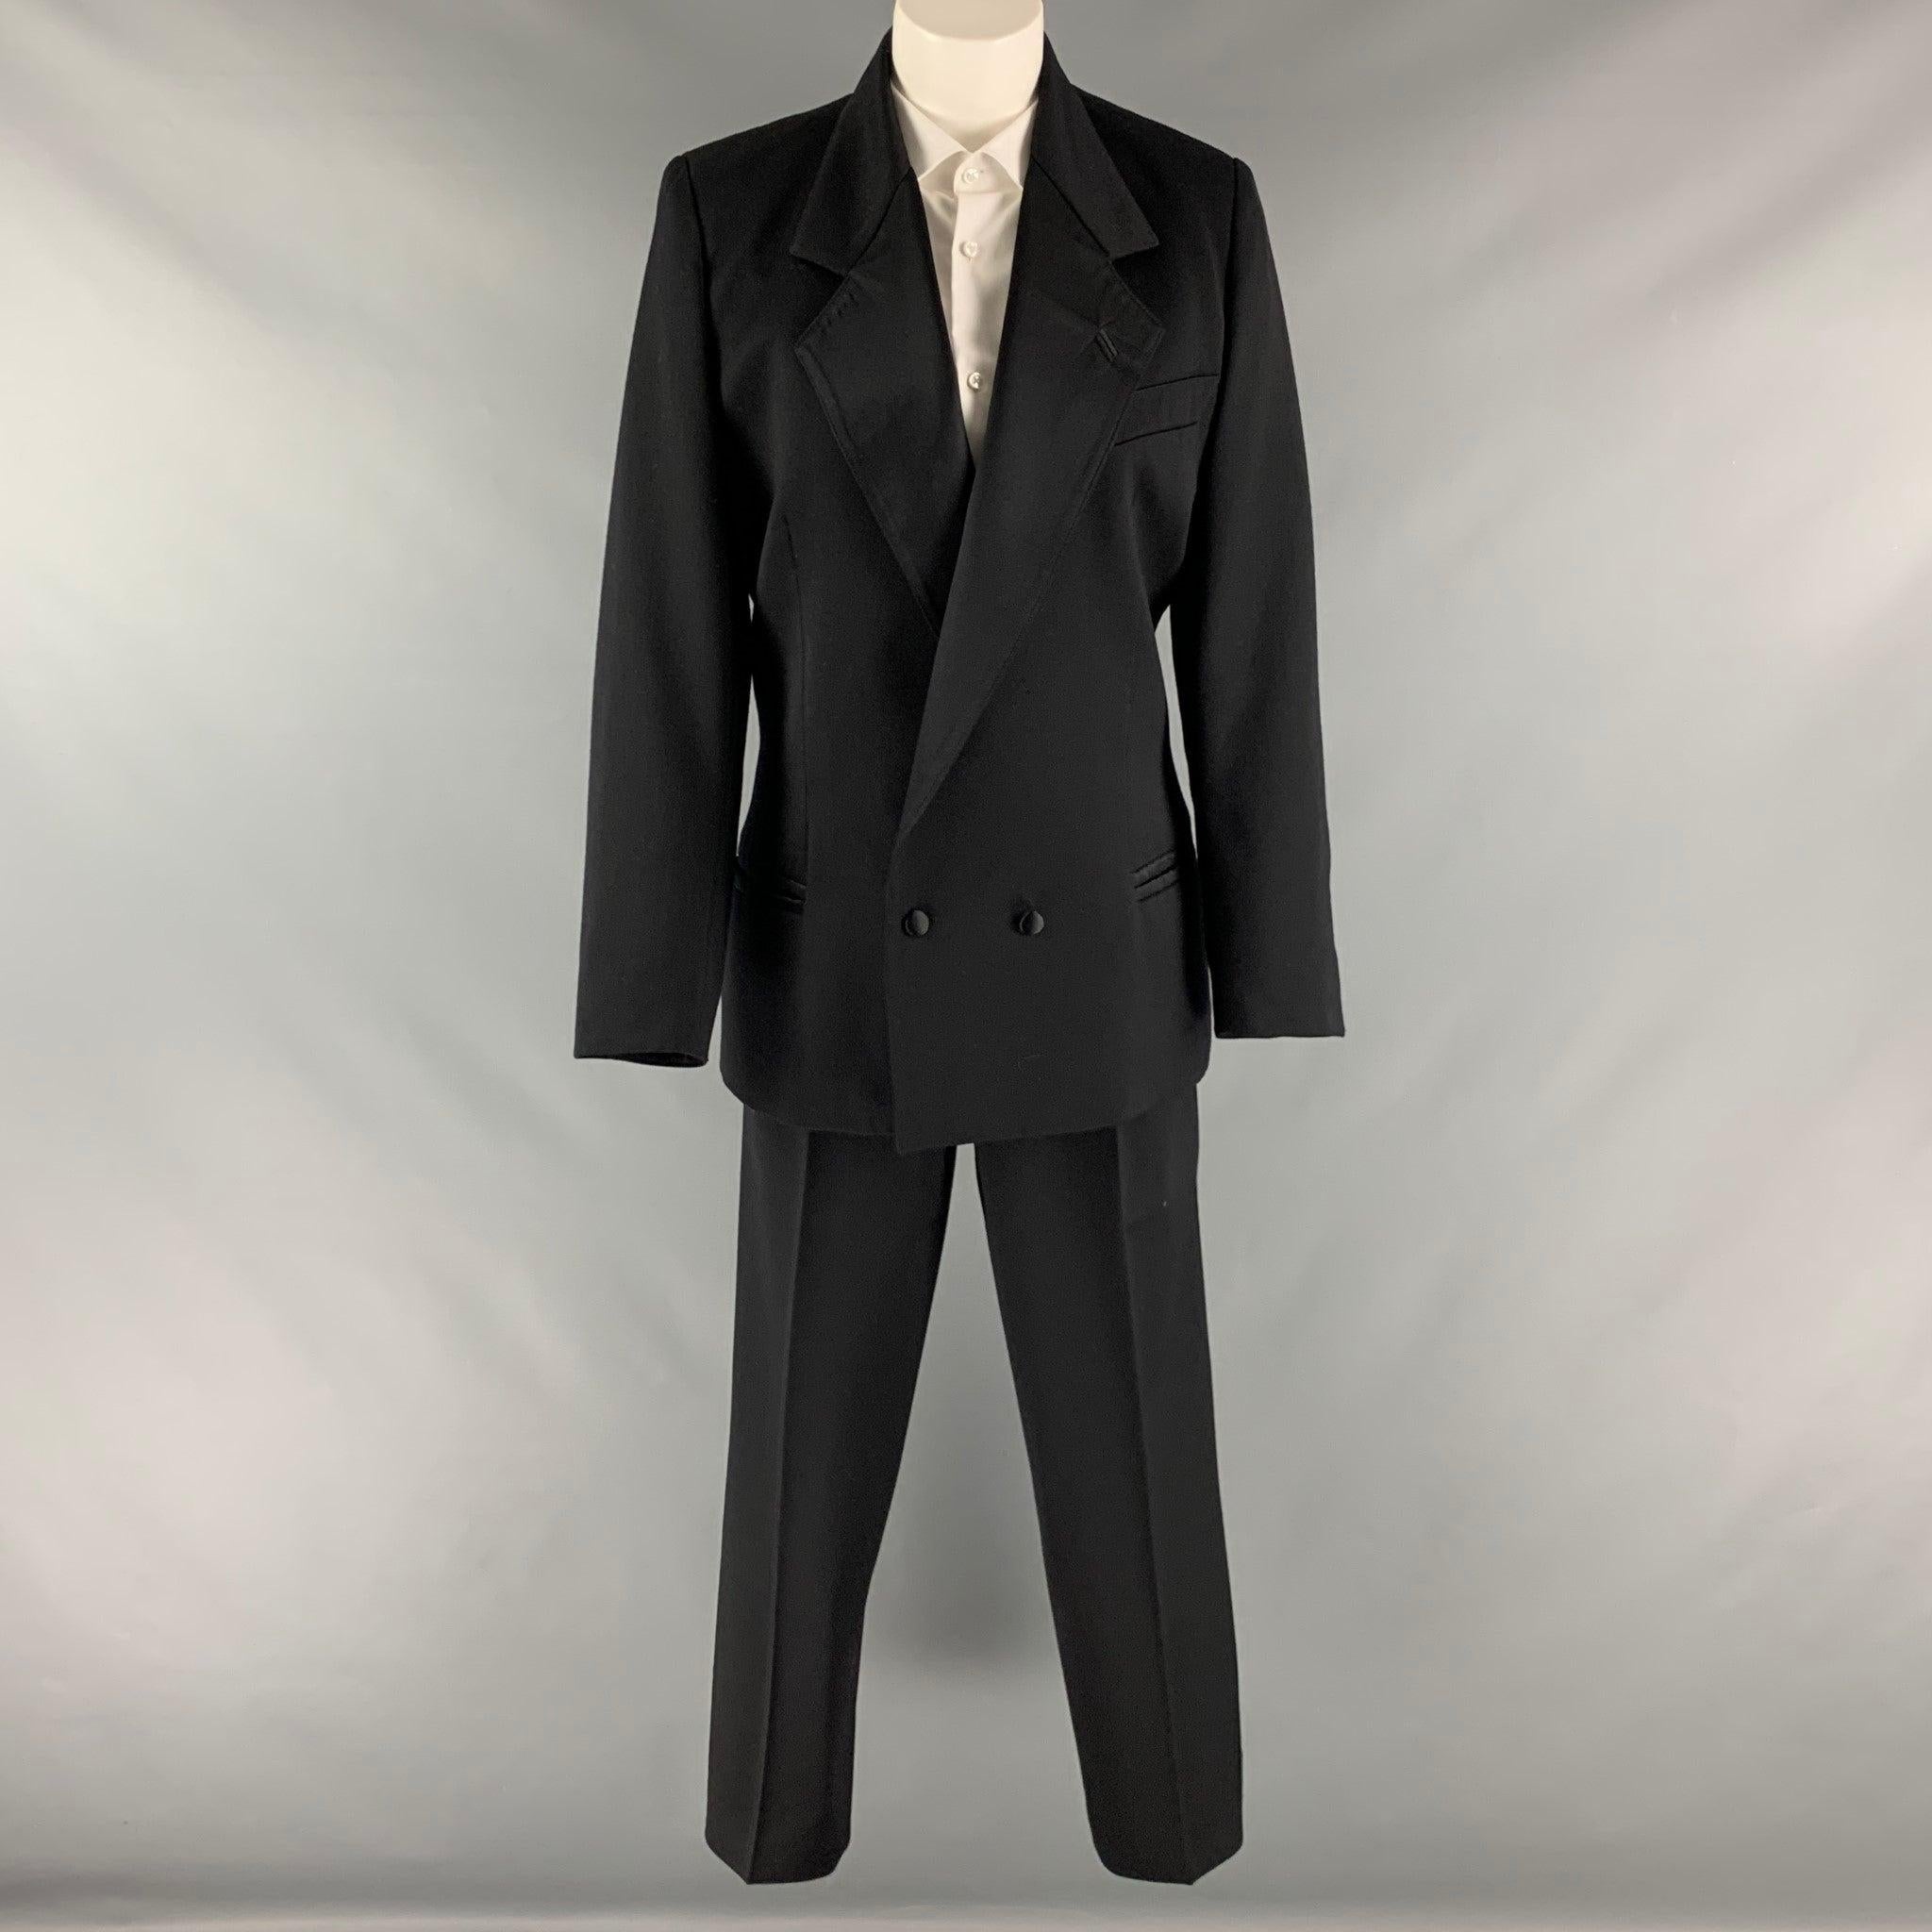 CLAUDE MONTANA pants suit set comes in a black silk woven material and includes a shoulder pads, notch lapel, double breasted jacket, and matching high waist pleated front pants.Very Good Pre- Owned Conditions. Moderate marks of wear. 

Marked:   46